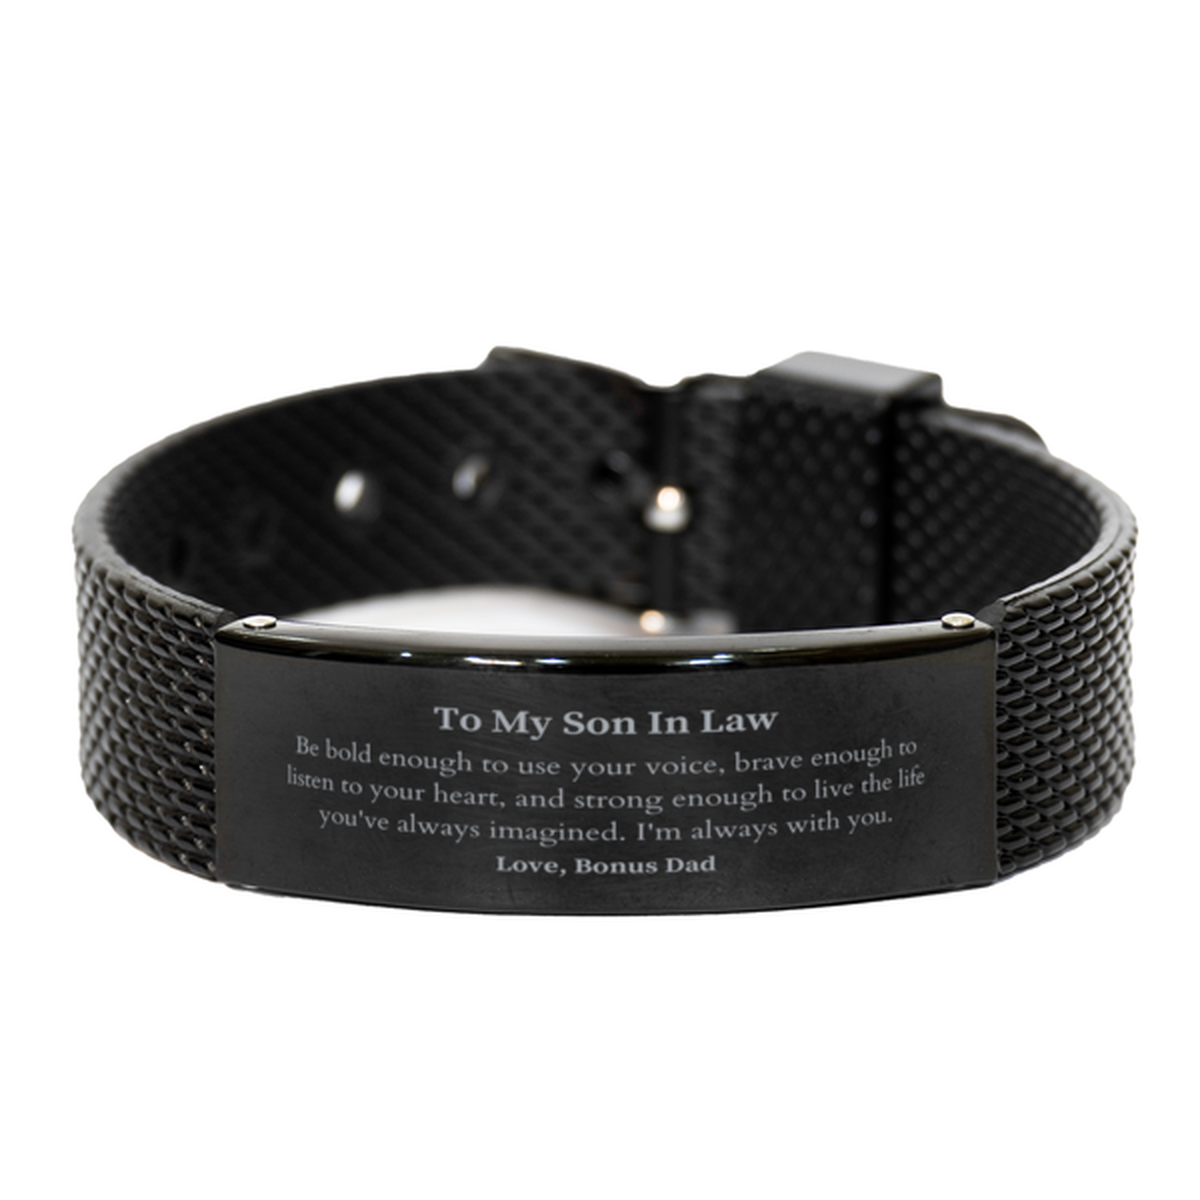 Keepsake Son In Law Black Shark Mesh Bracelet Gift Idea Graduation Christmas Birthday Son In Law from Bonus Dad, Son In Law Be bold enough to use your voice, brave enough to listen to your heart. Love, Bonus Dad